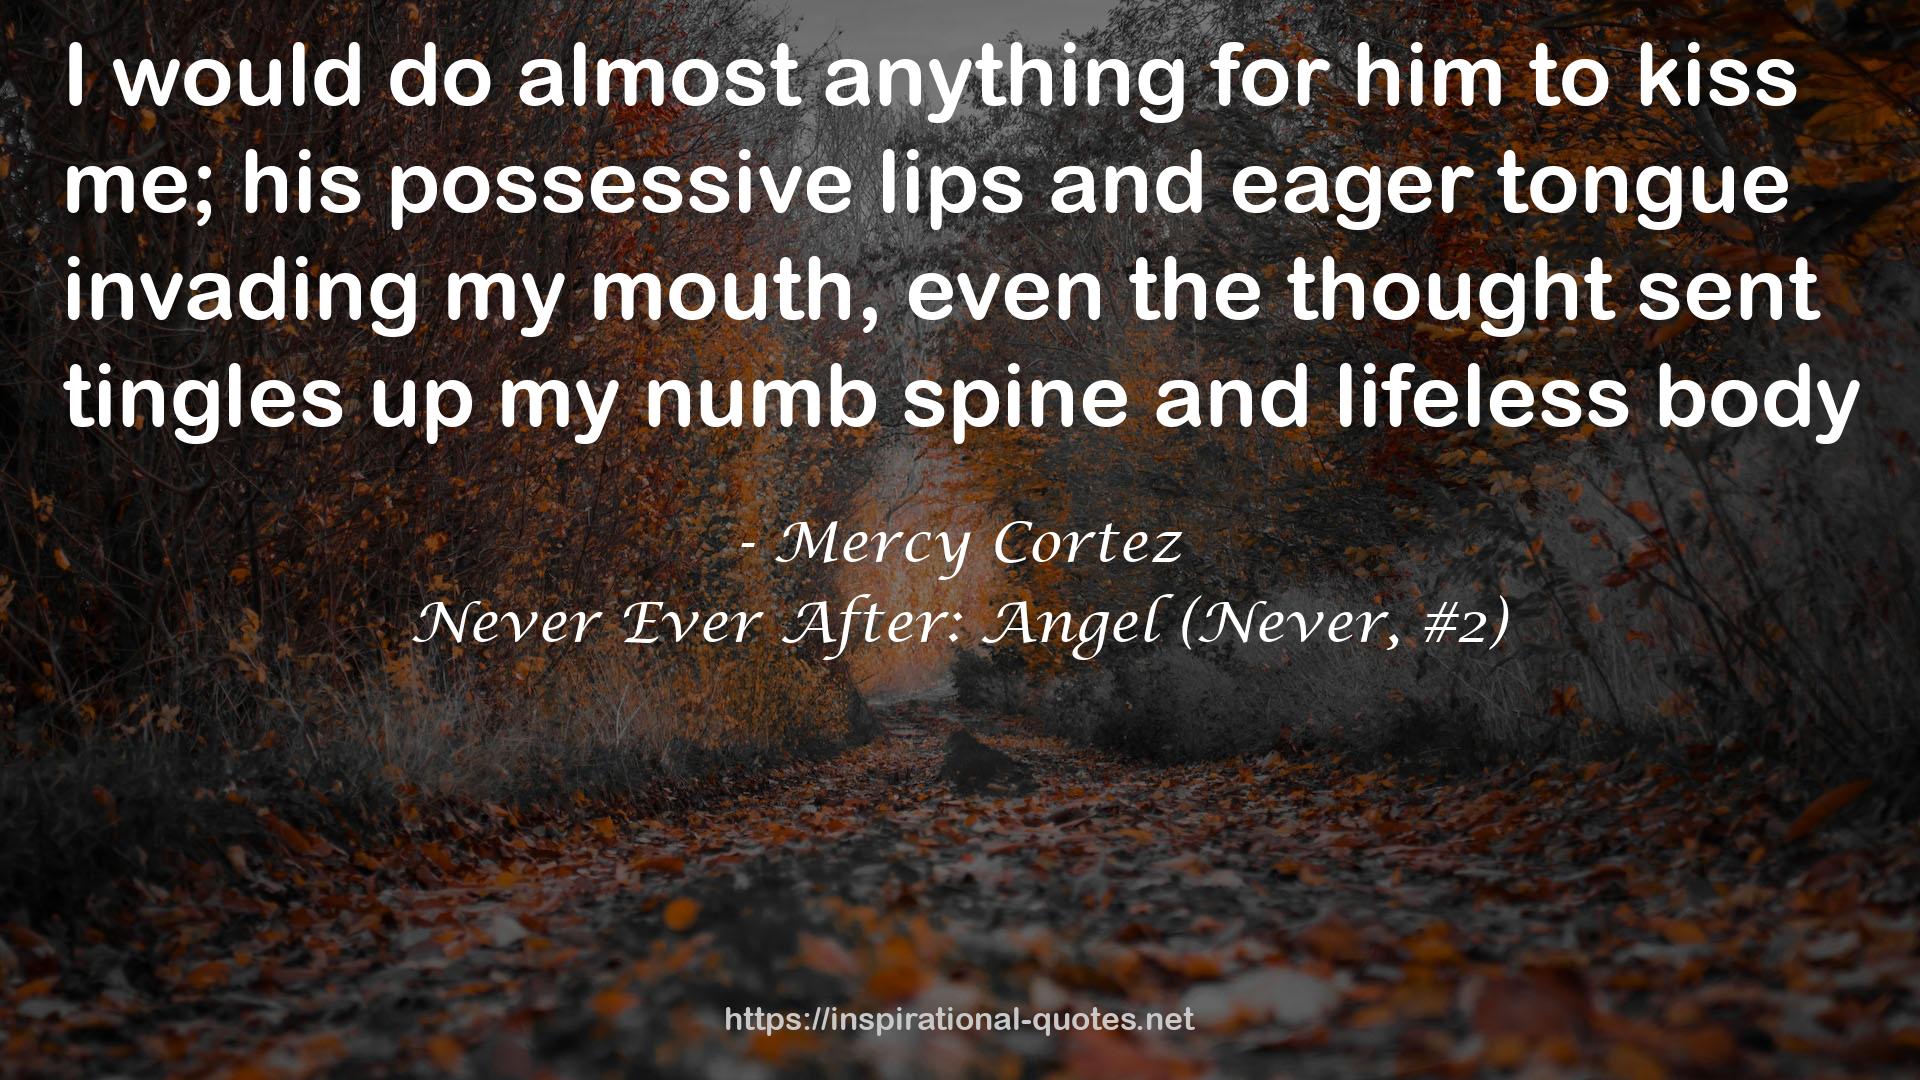 Never Ever After: Angel (Never, #2) QUOTES